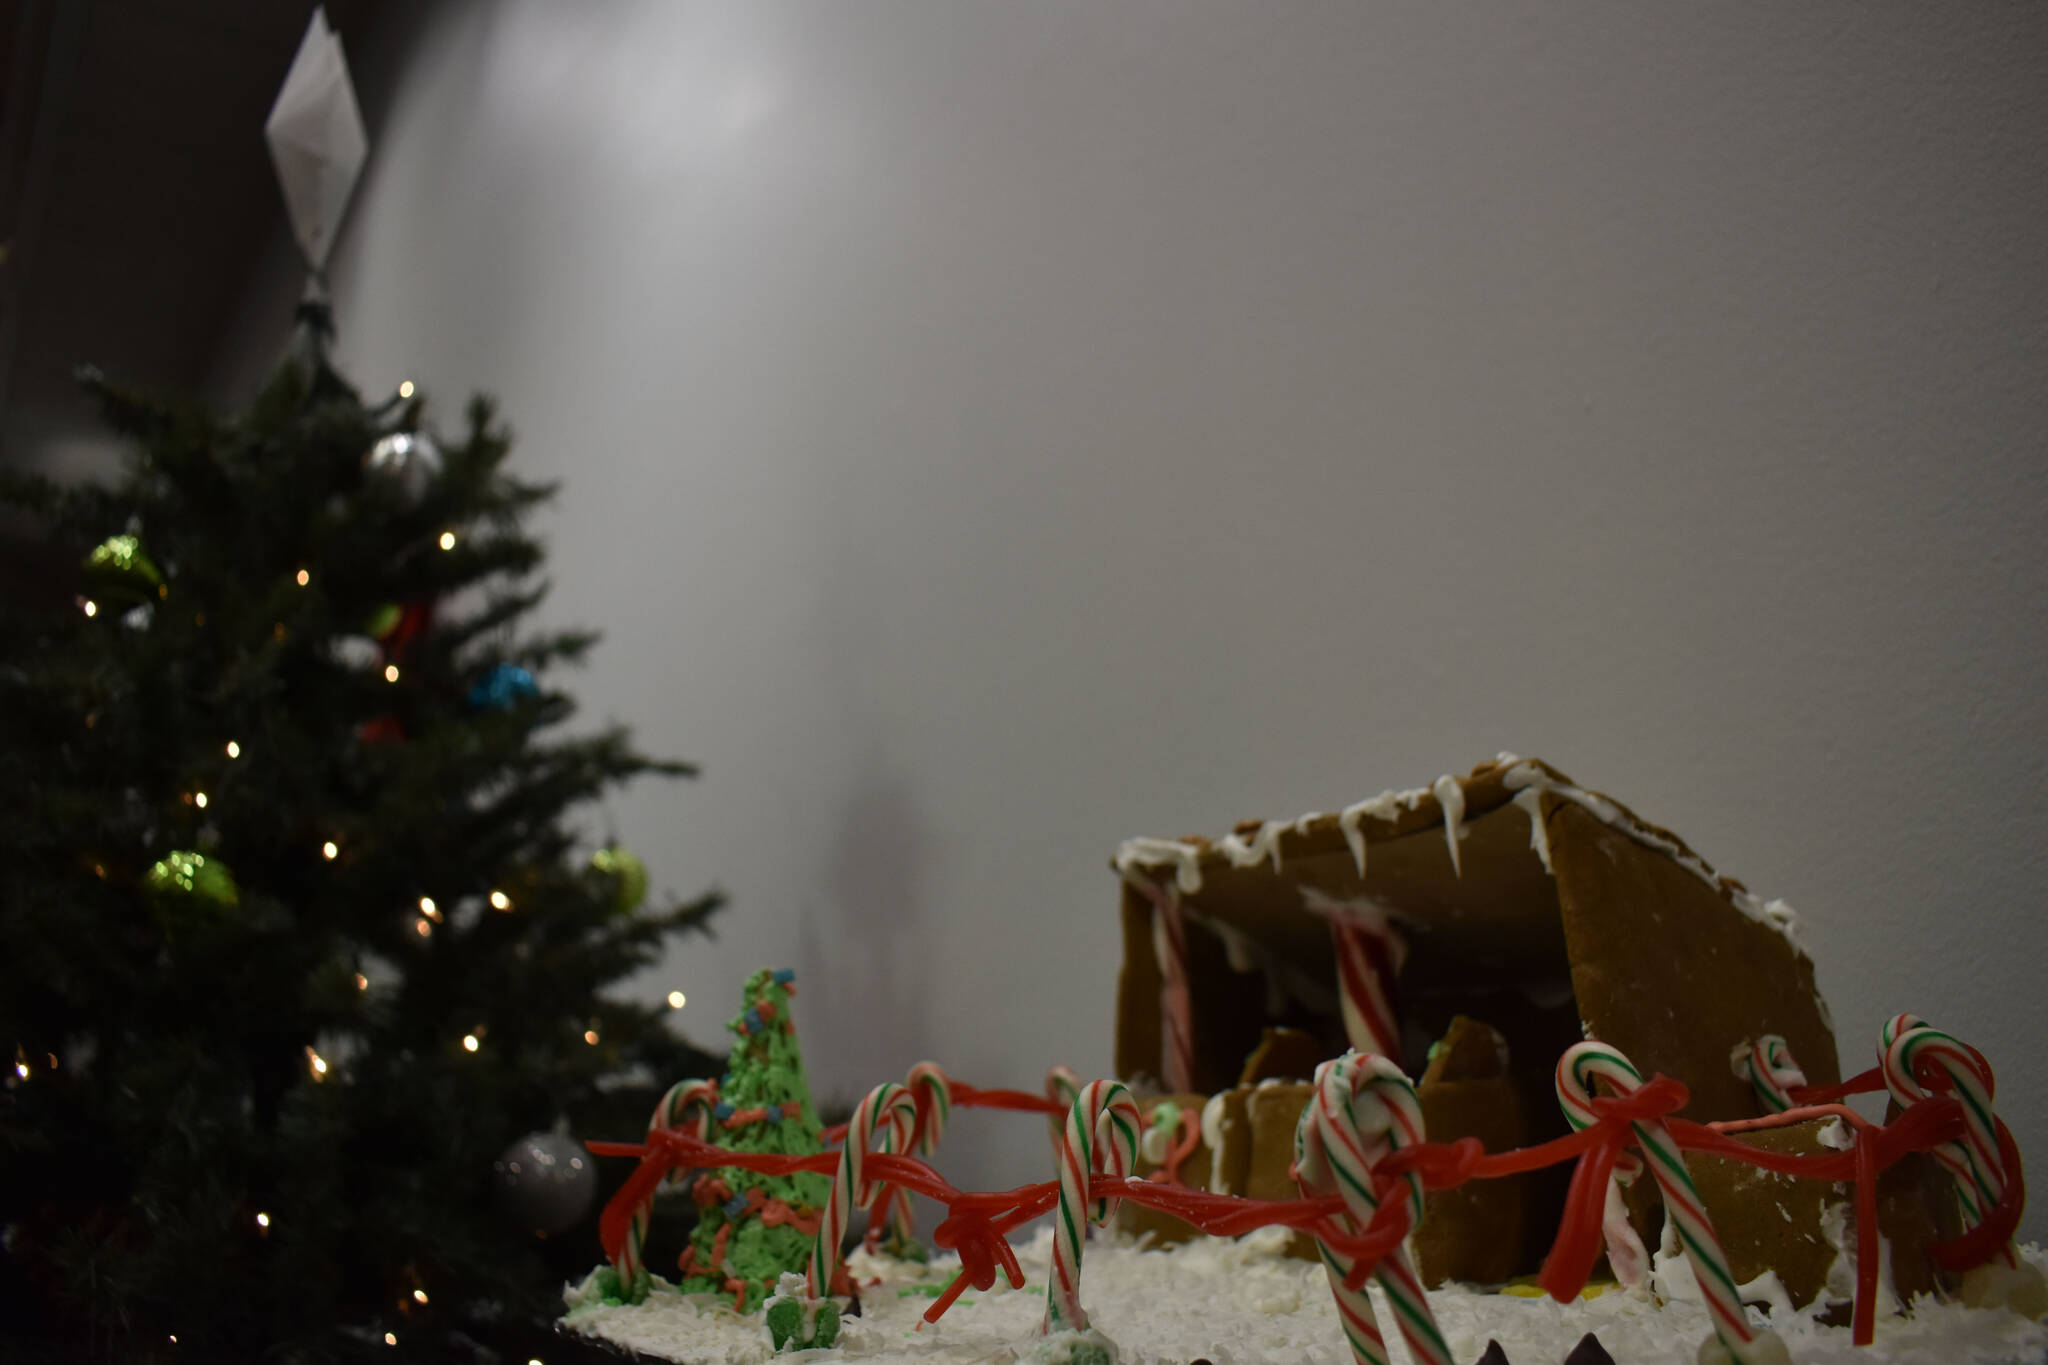 A gingerbread house designed by Josephine is displayed at the Kenai Chamber of Commerce and Visitor Center on Tuesday, Dec. 6, 2022. (Jake Dye/Peninsula Clarion)